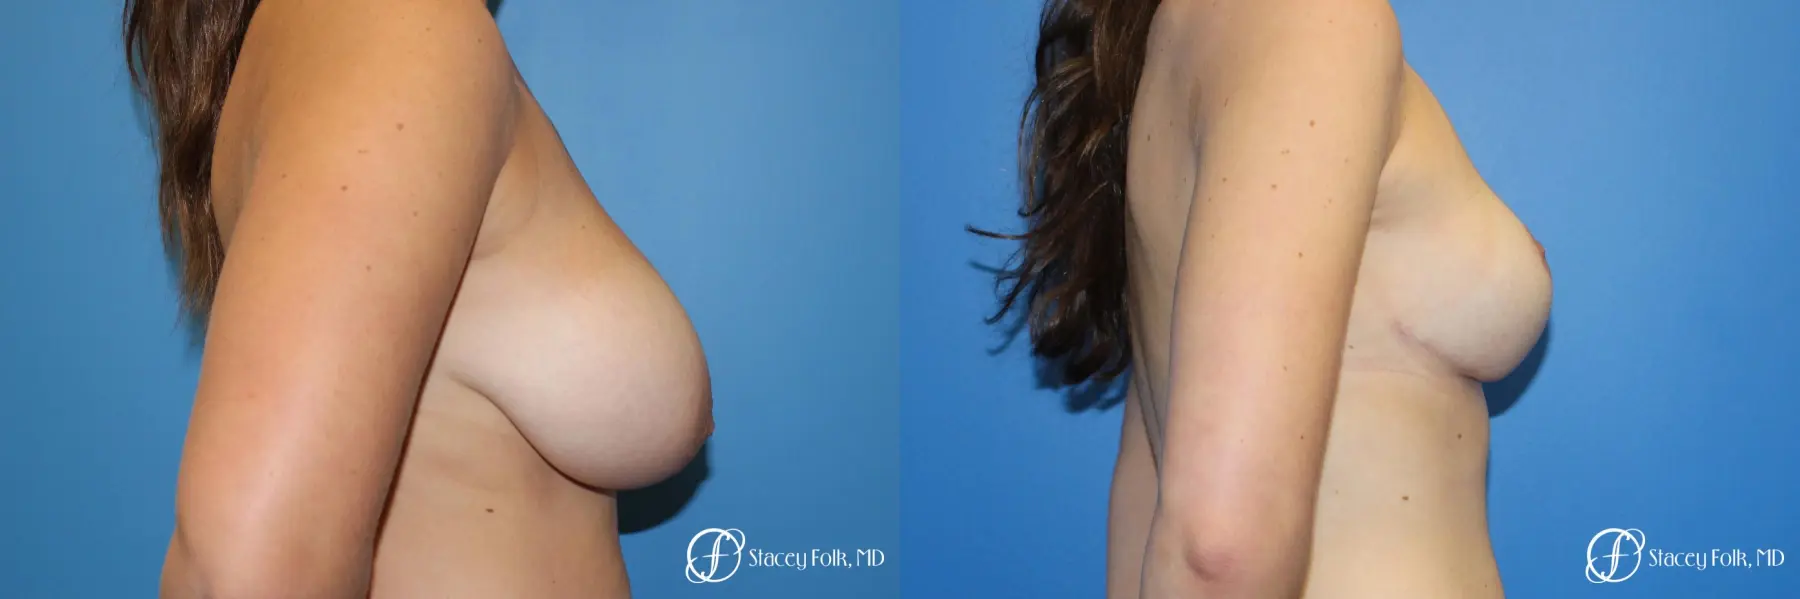 Denver Breast Lift - Mastopexy 10021 - Before and After 5